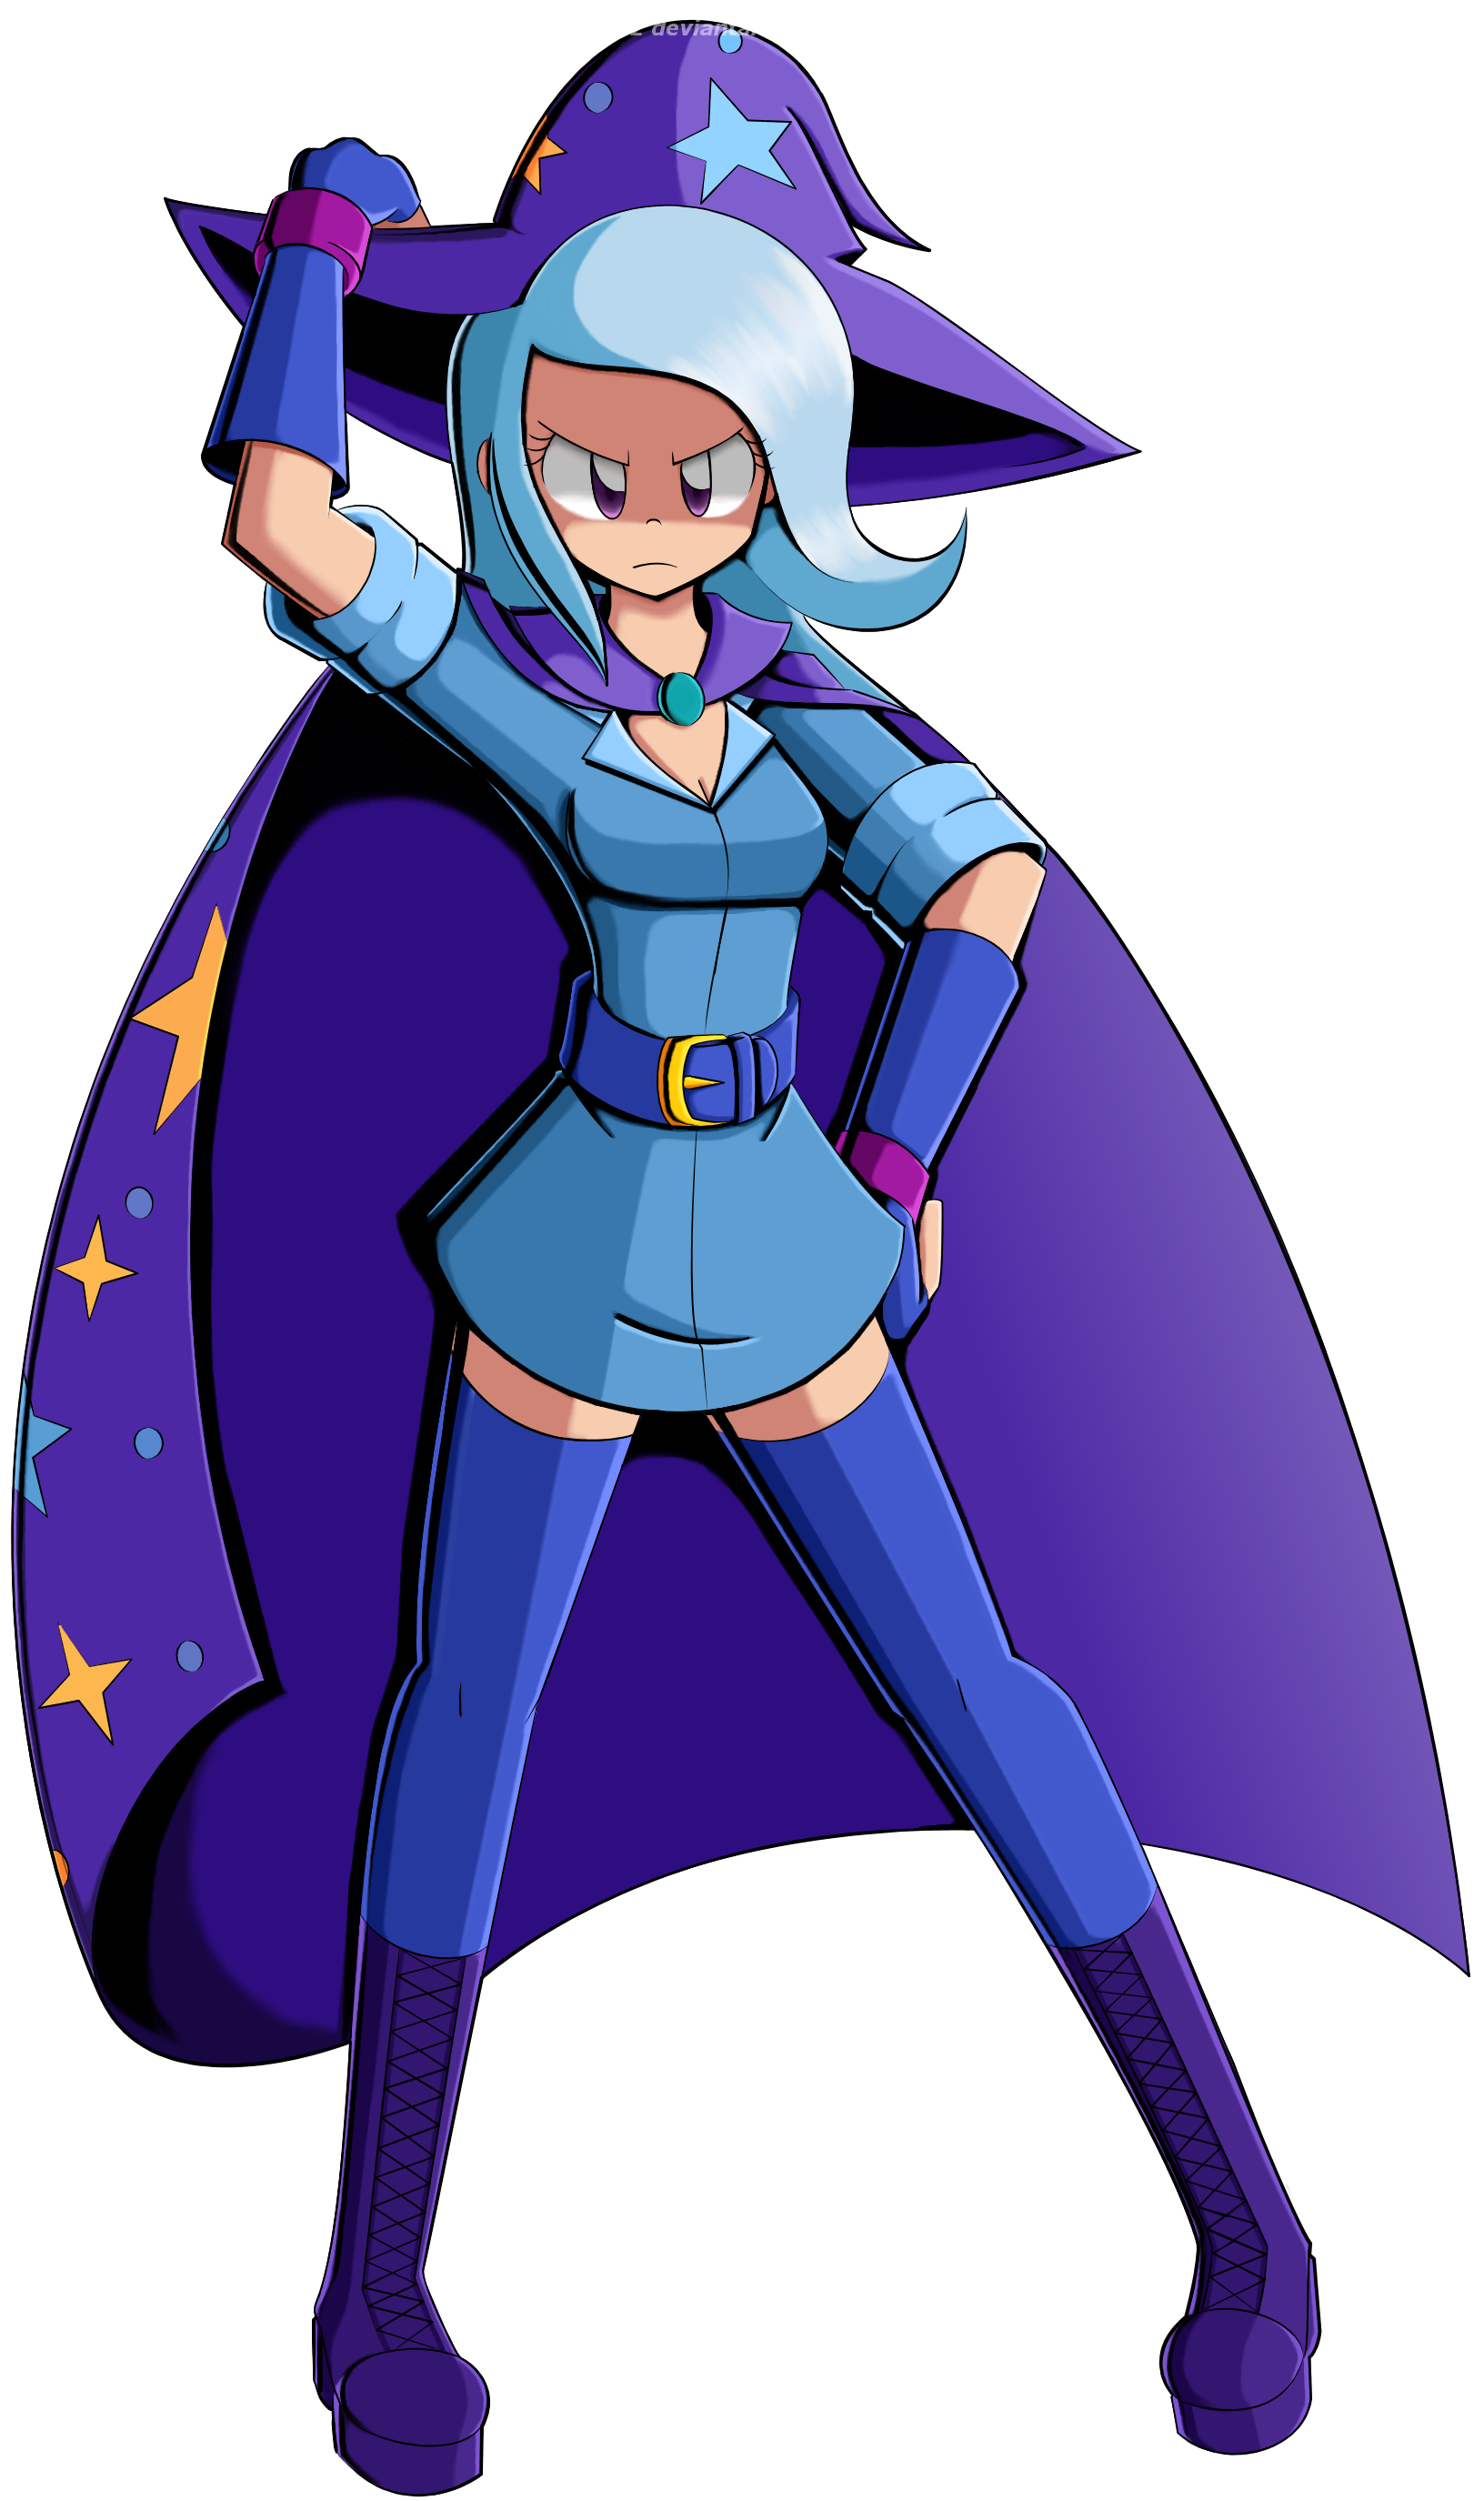 http://orig15.deviantart.net/7433/f/2014/087/1/4/the_great_and_powerful_trixie_by_kurus22-d7c11tx.png